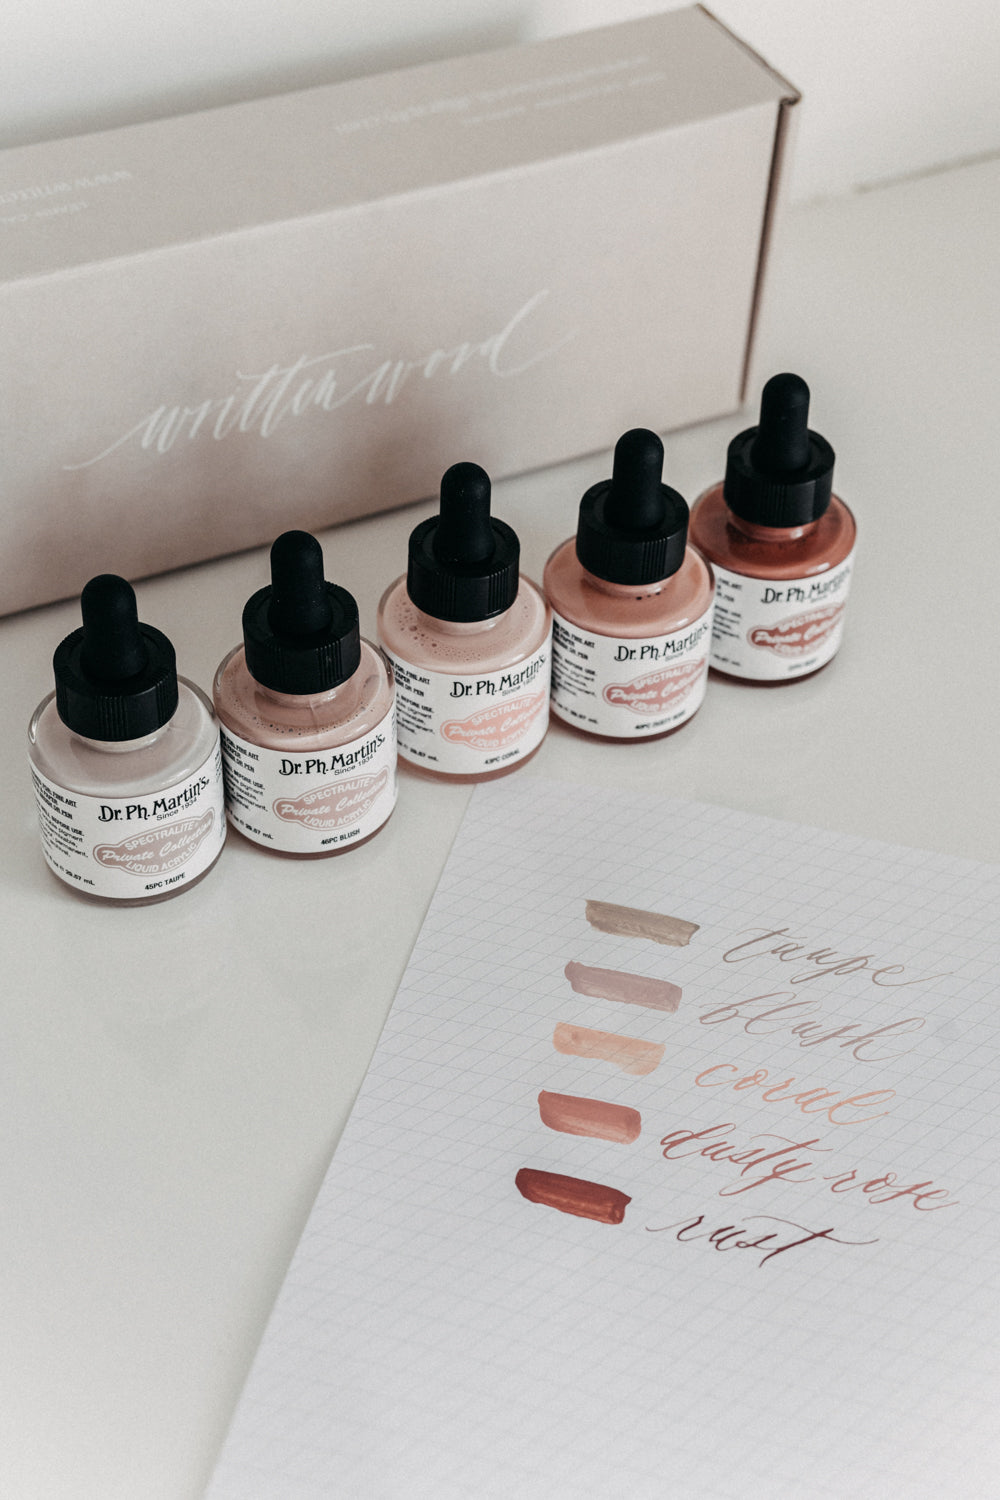 Dr Ph Martin's Hydrus Watercolour & Calligraphy Ink Set - SET 2